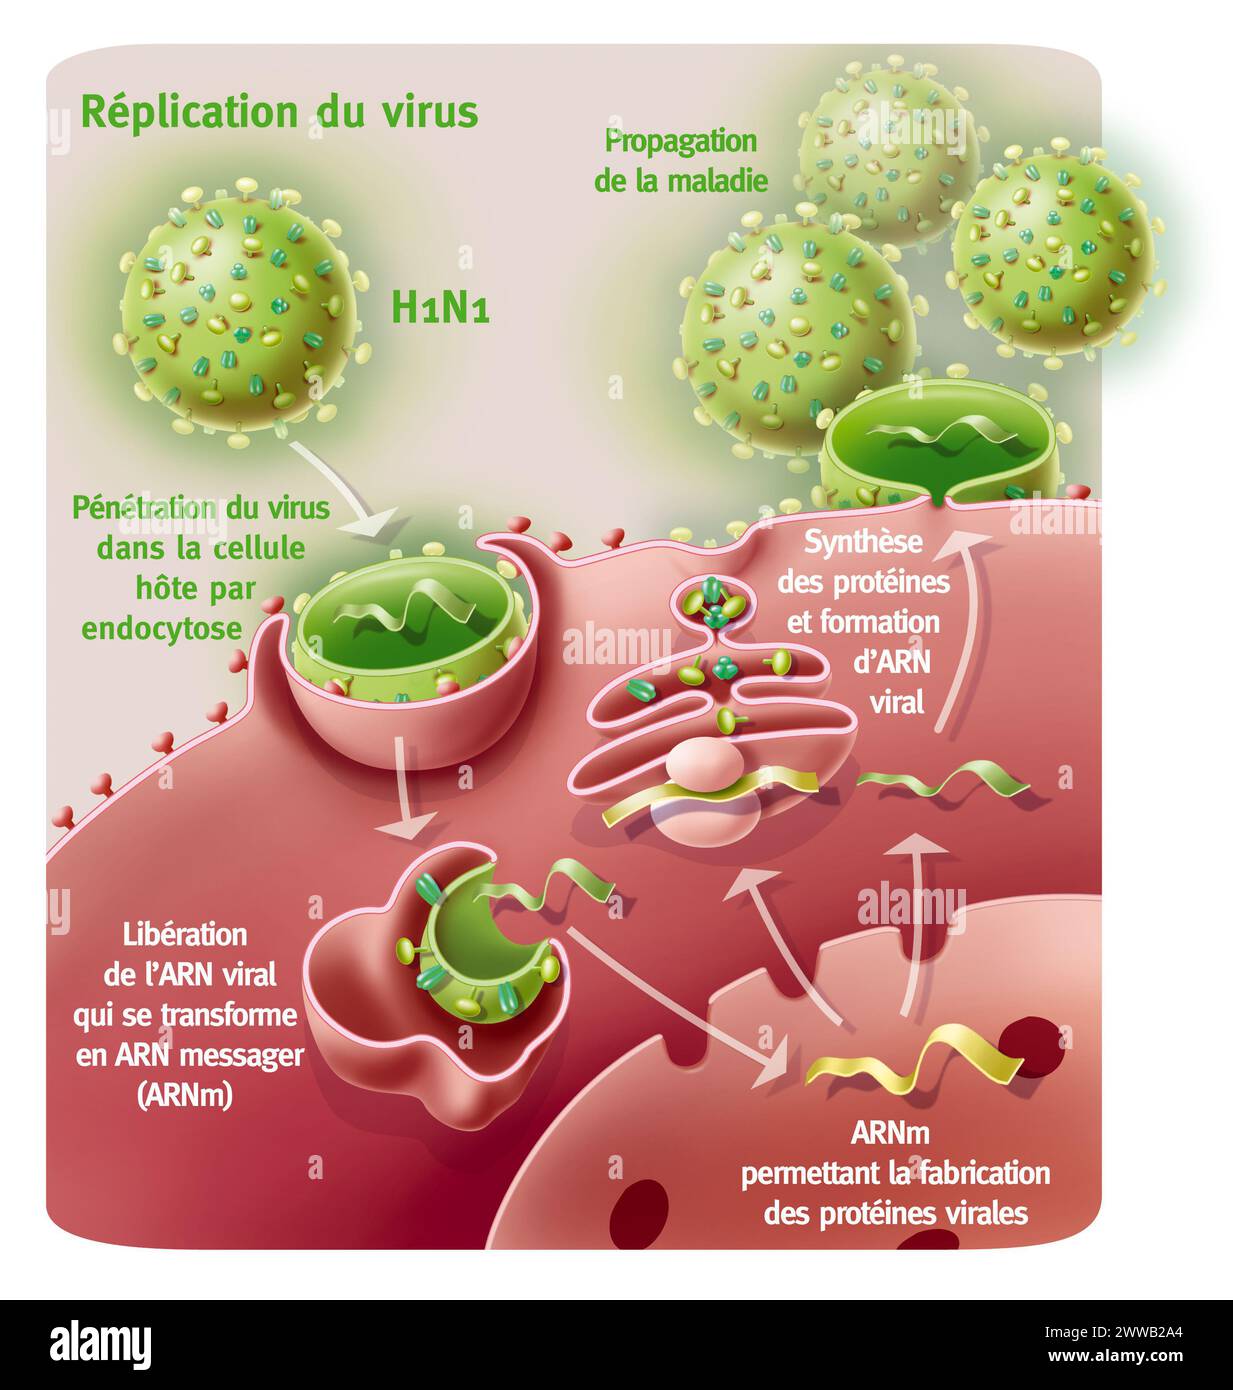 Replication of the H1N1 virus. Representation of the penetration and replication of the H1N1 virus thanks to a host cell. Stock Photo